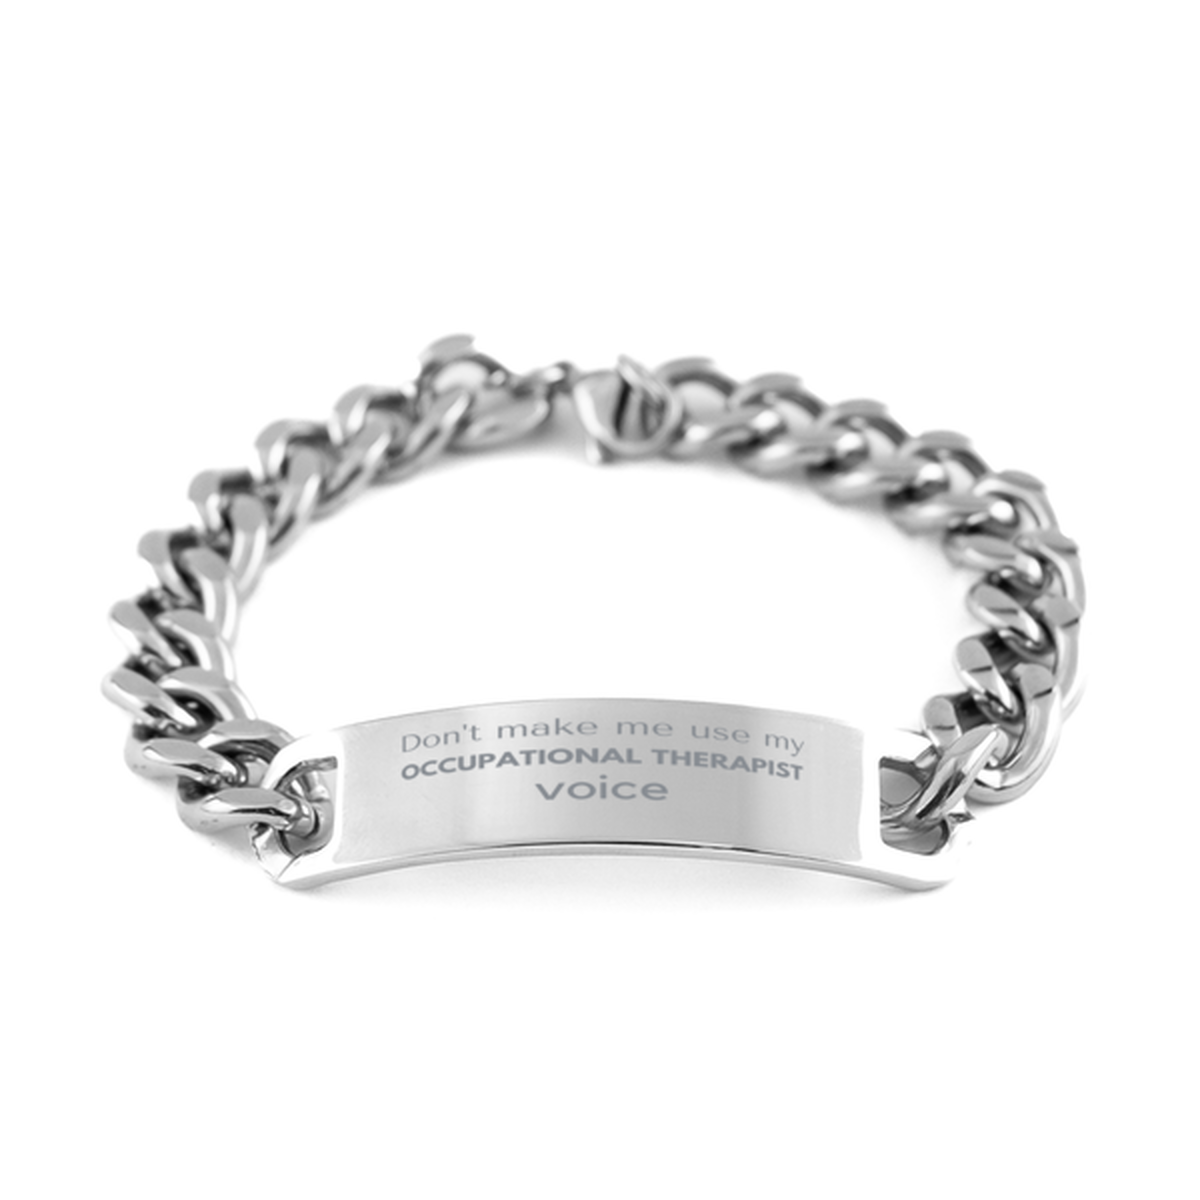 Don't make me use my Occupational Therapist voice, Sarcasm Occupational Therapist Gifts, Christmas Occupational Therapist Cuban Chain Stainless Steel Bracelet Birthday Unique Gifts For Occupational Therapist Coworkers, Men, Women, Colleague, Friends